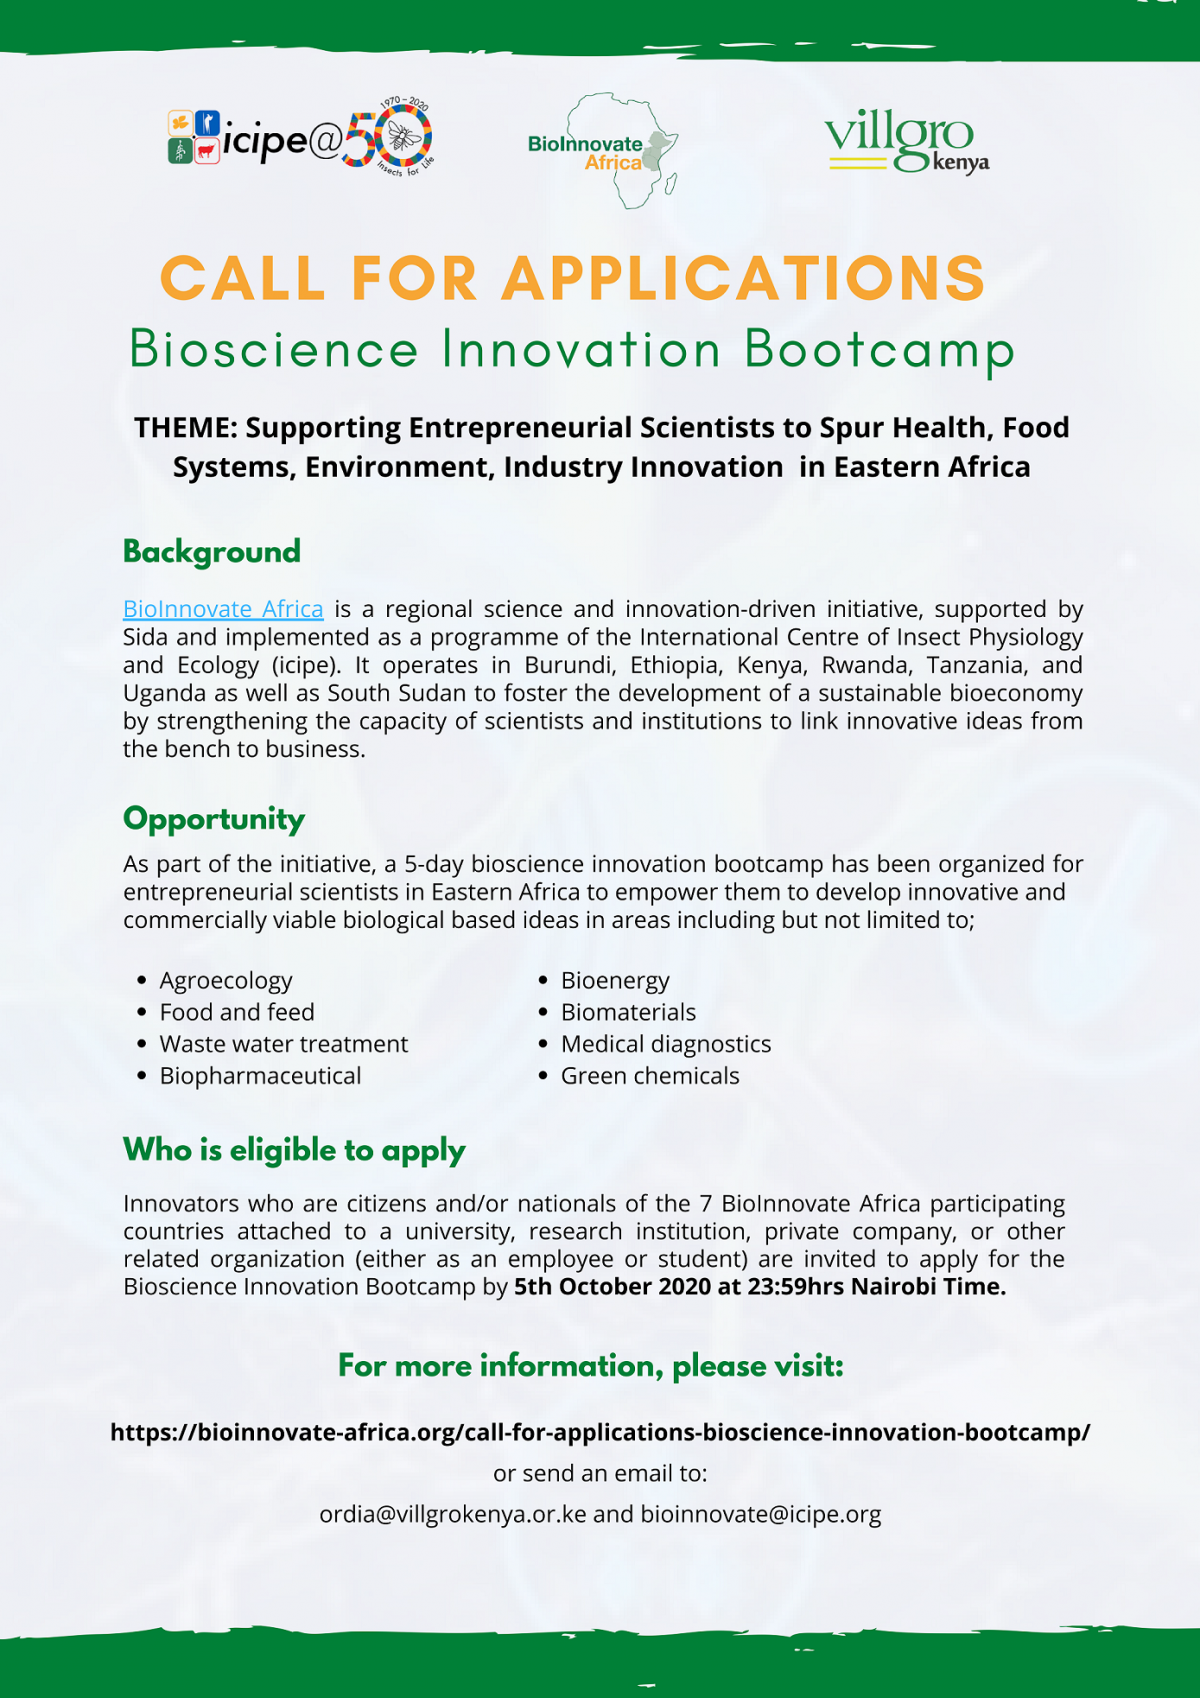 CALL FOR APPLICATIONS – BIOSCIENCE INNOVATION BOOTCAMP